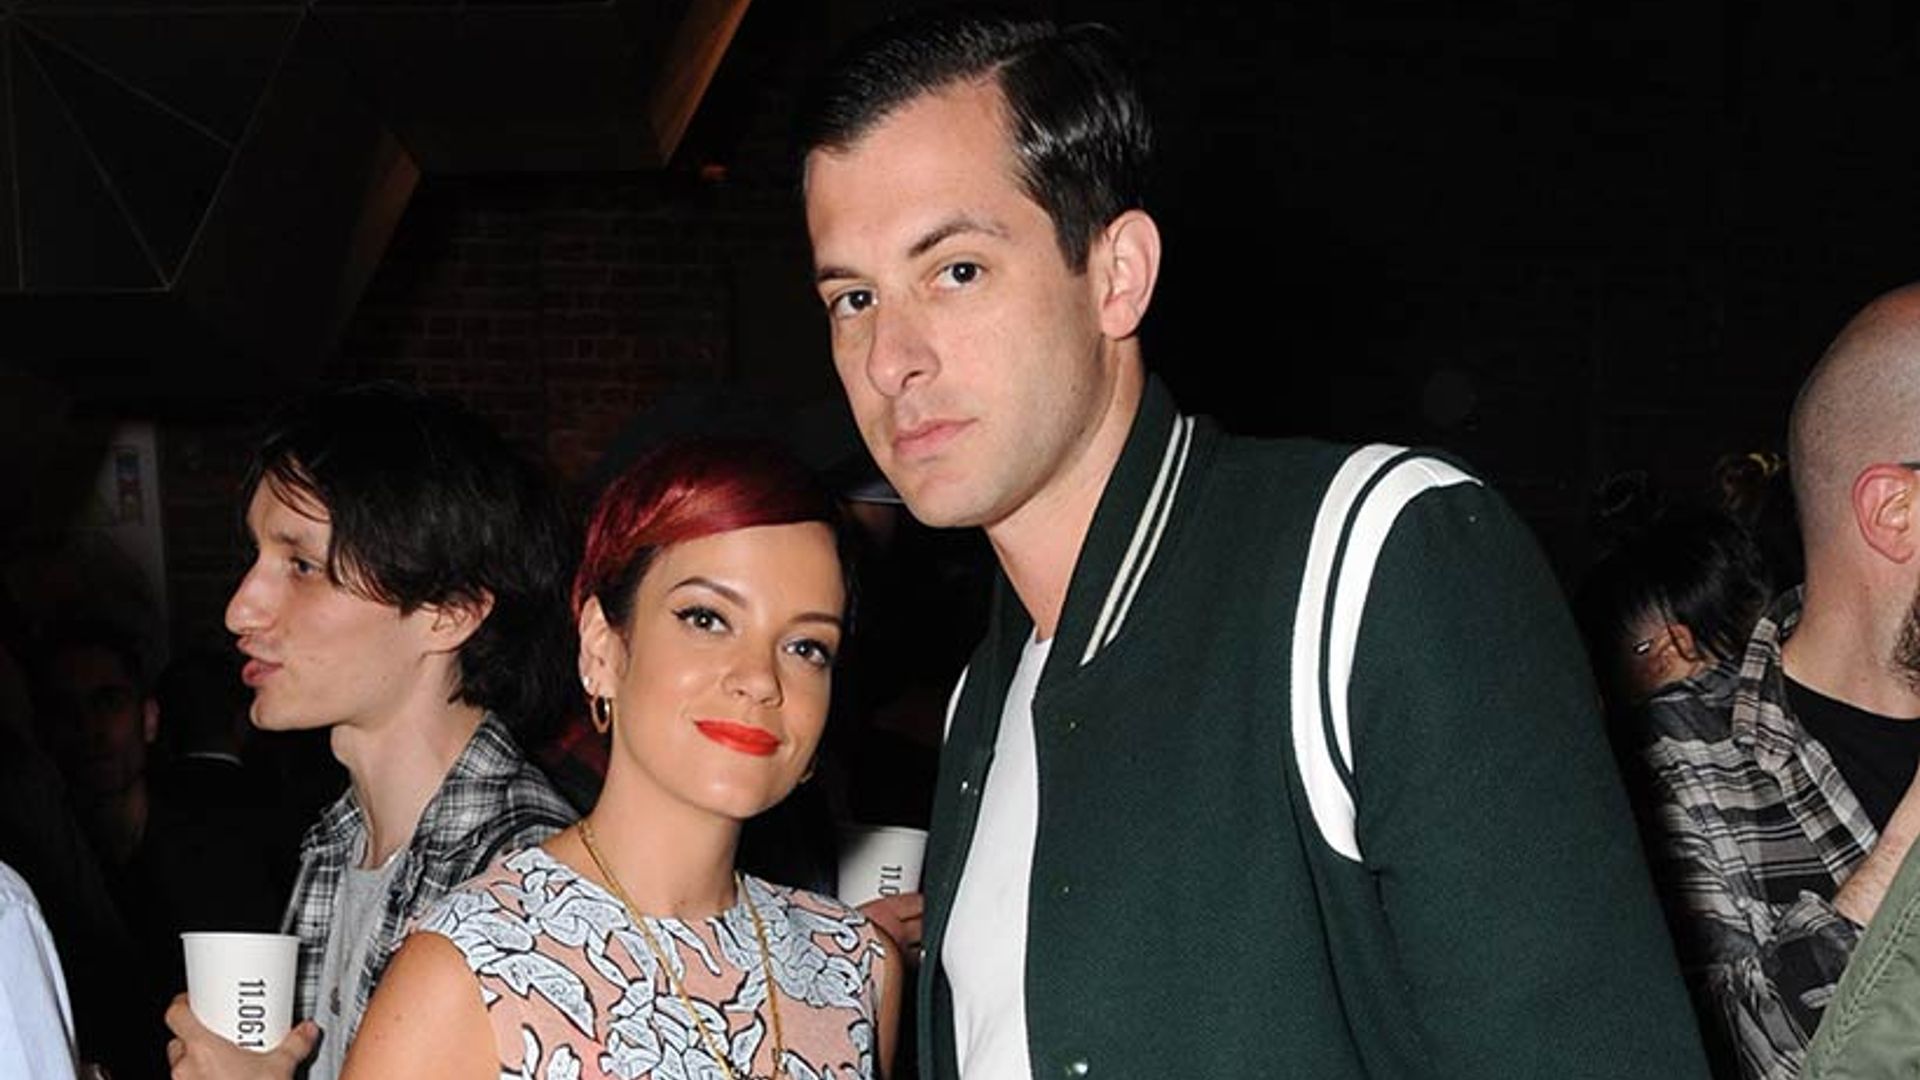 Lily Allen recording 'heartbreaking' new album as she appears to confirm new relationship